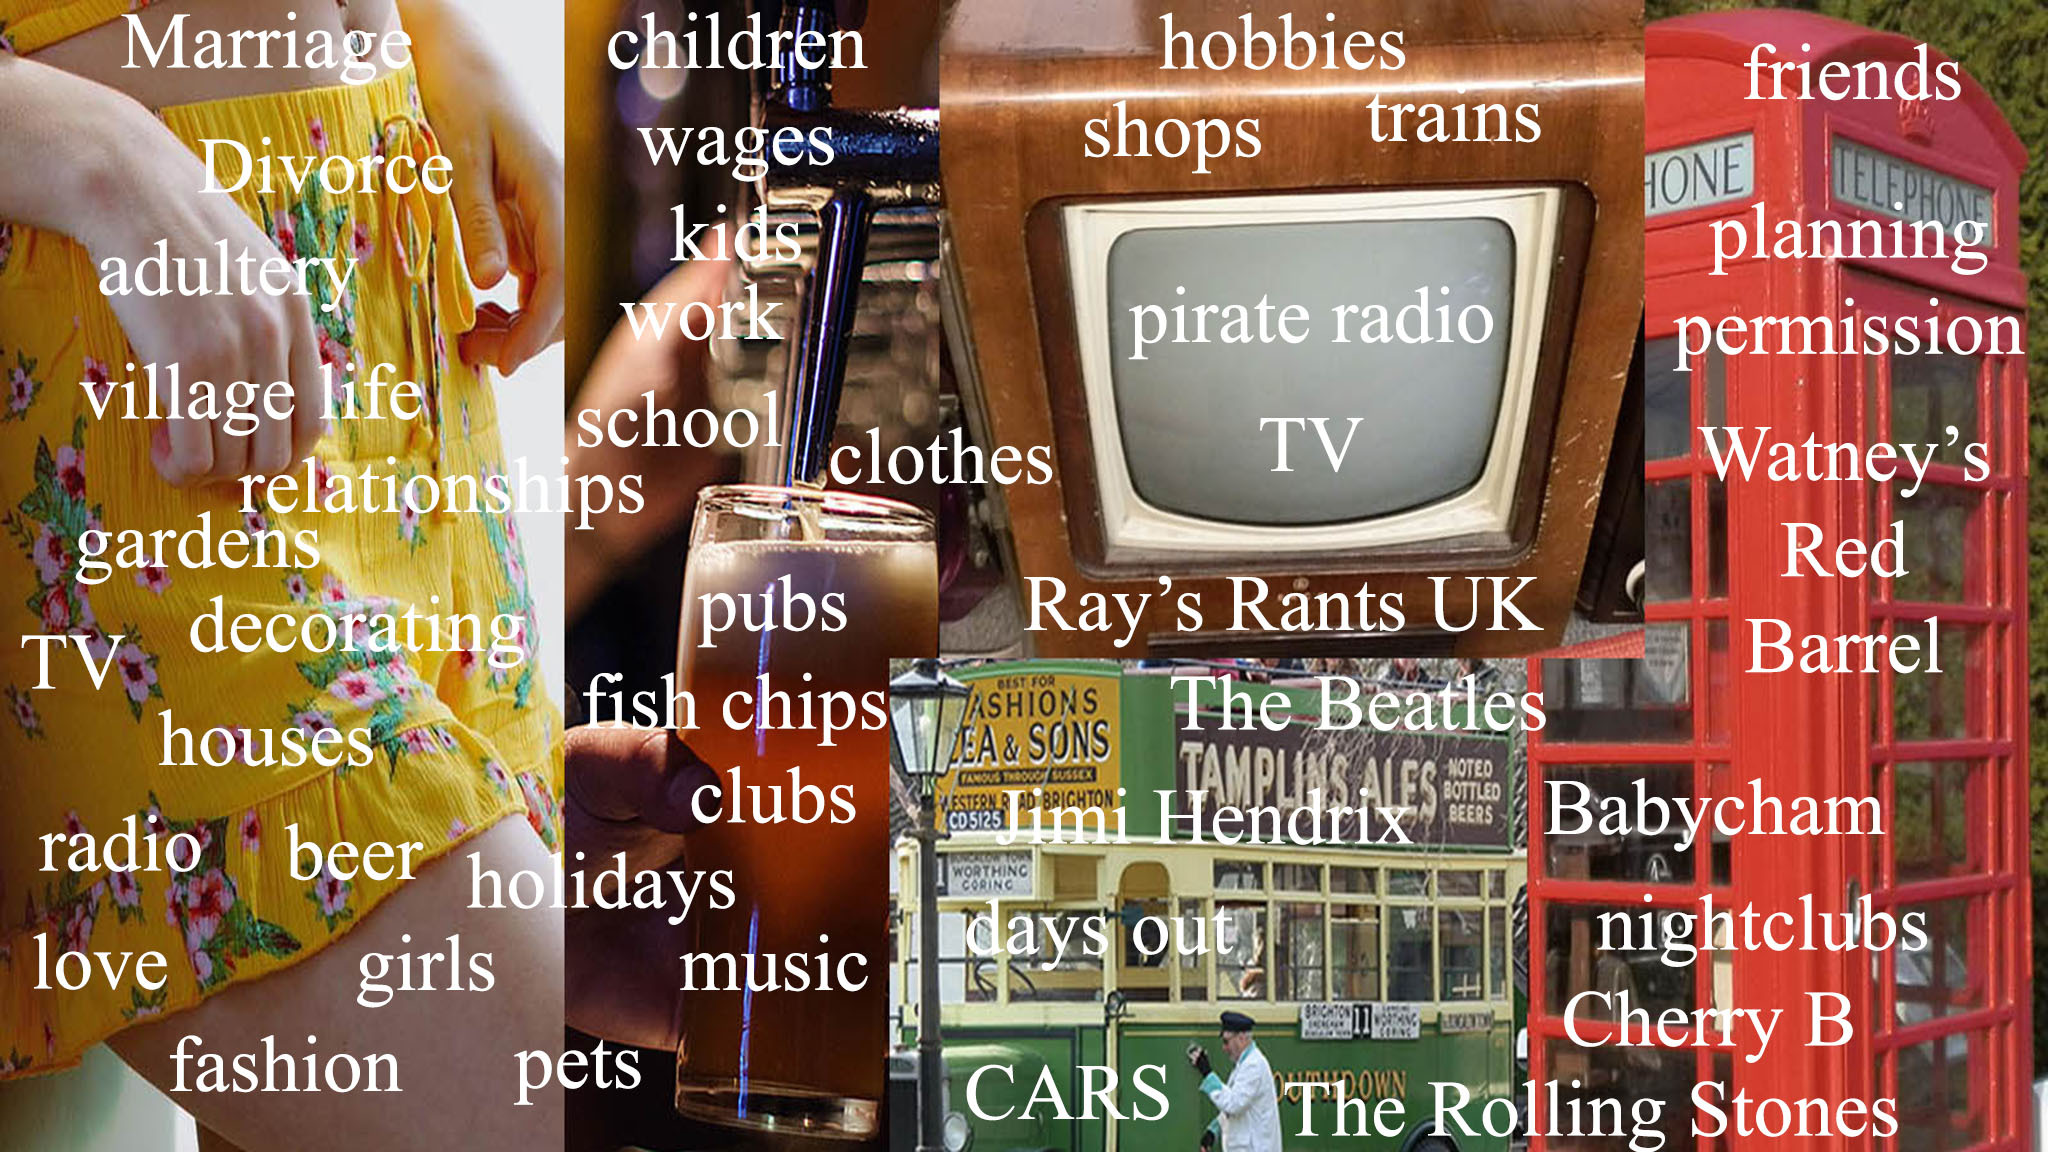 The 50s 1960s 70s in the United Kingdom. Night life, music, television, pirate radio, London, Caroline, fashion, work and school. Recent history.